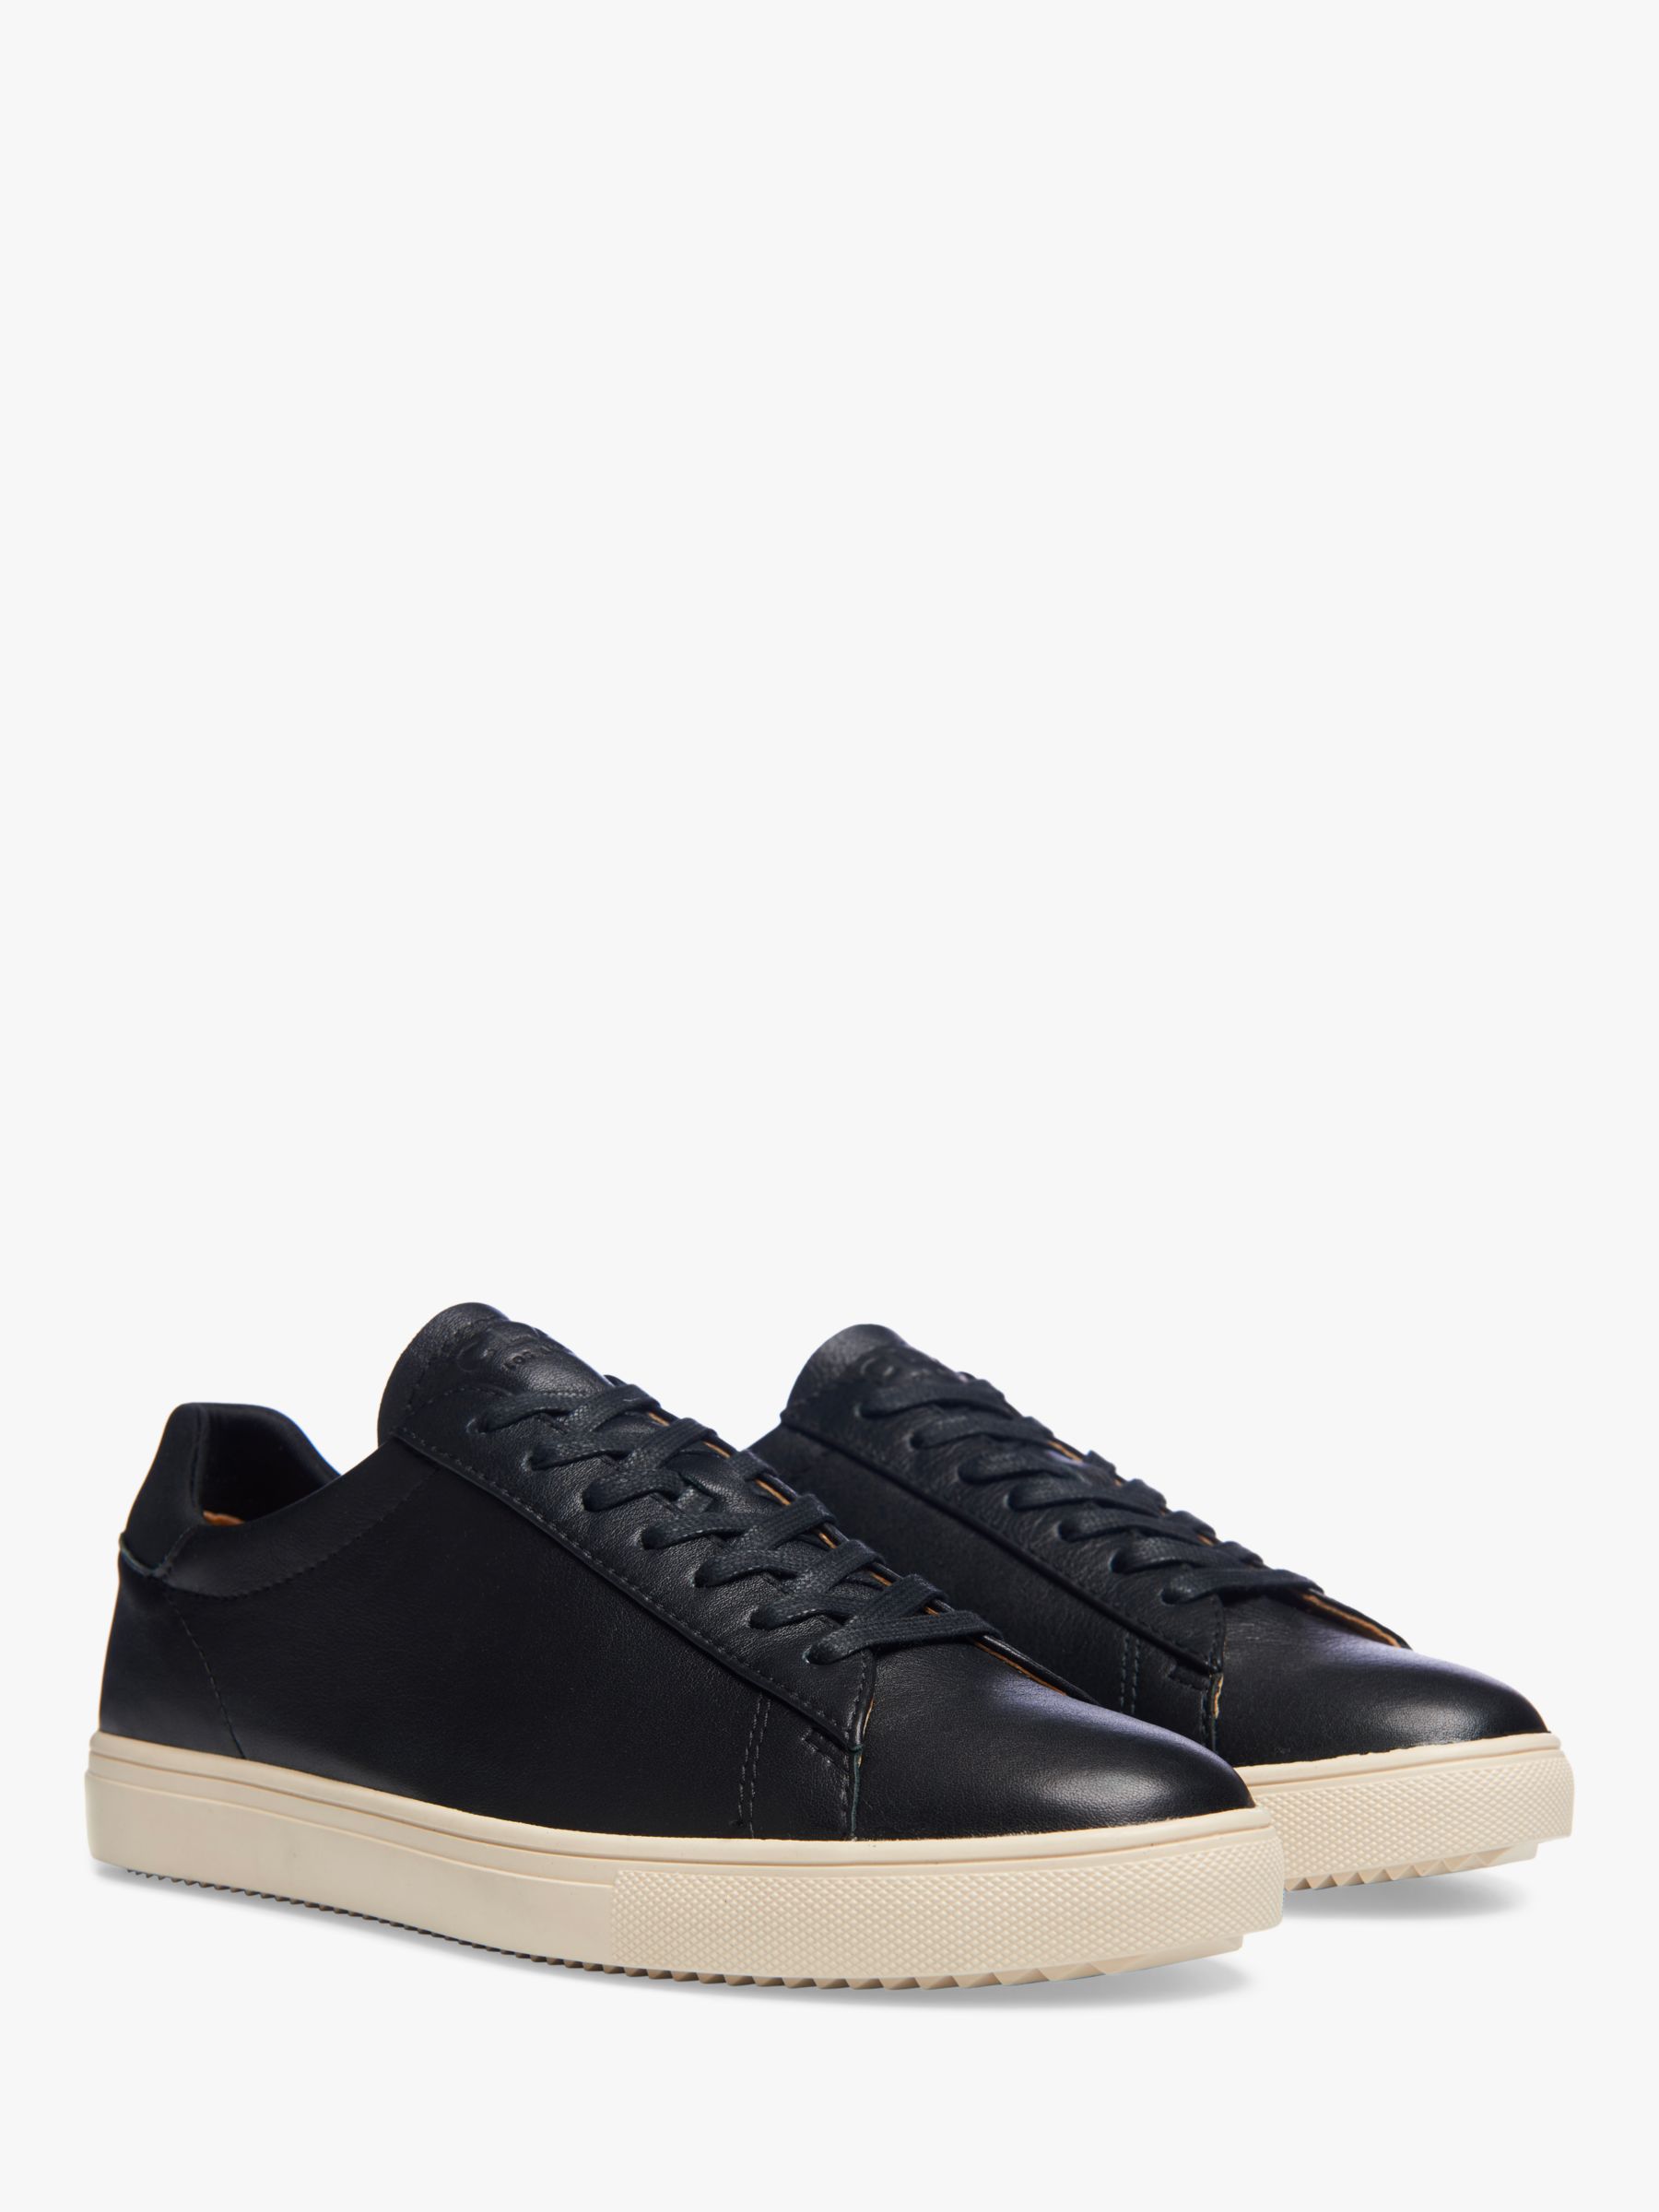 CLAE Bradley Essentials Leather Trainers, Black Milled Leather, 7